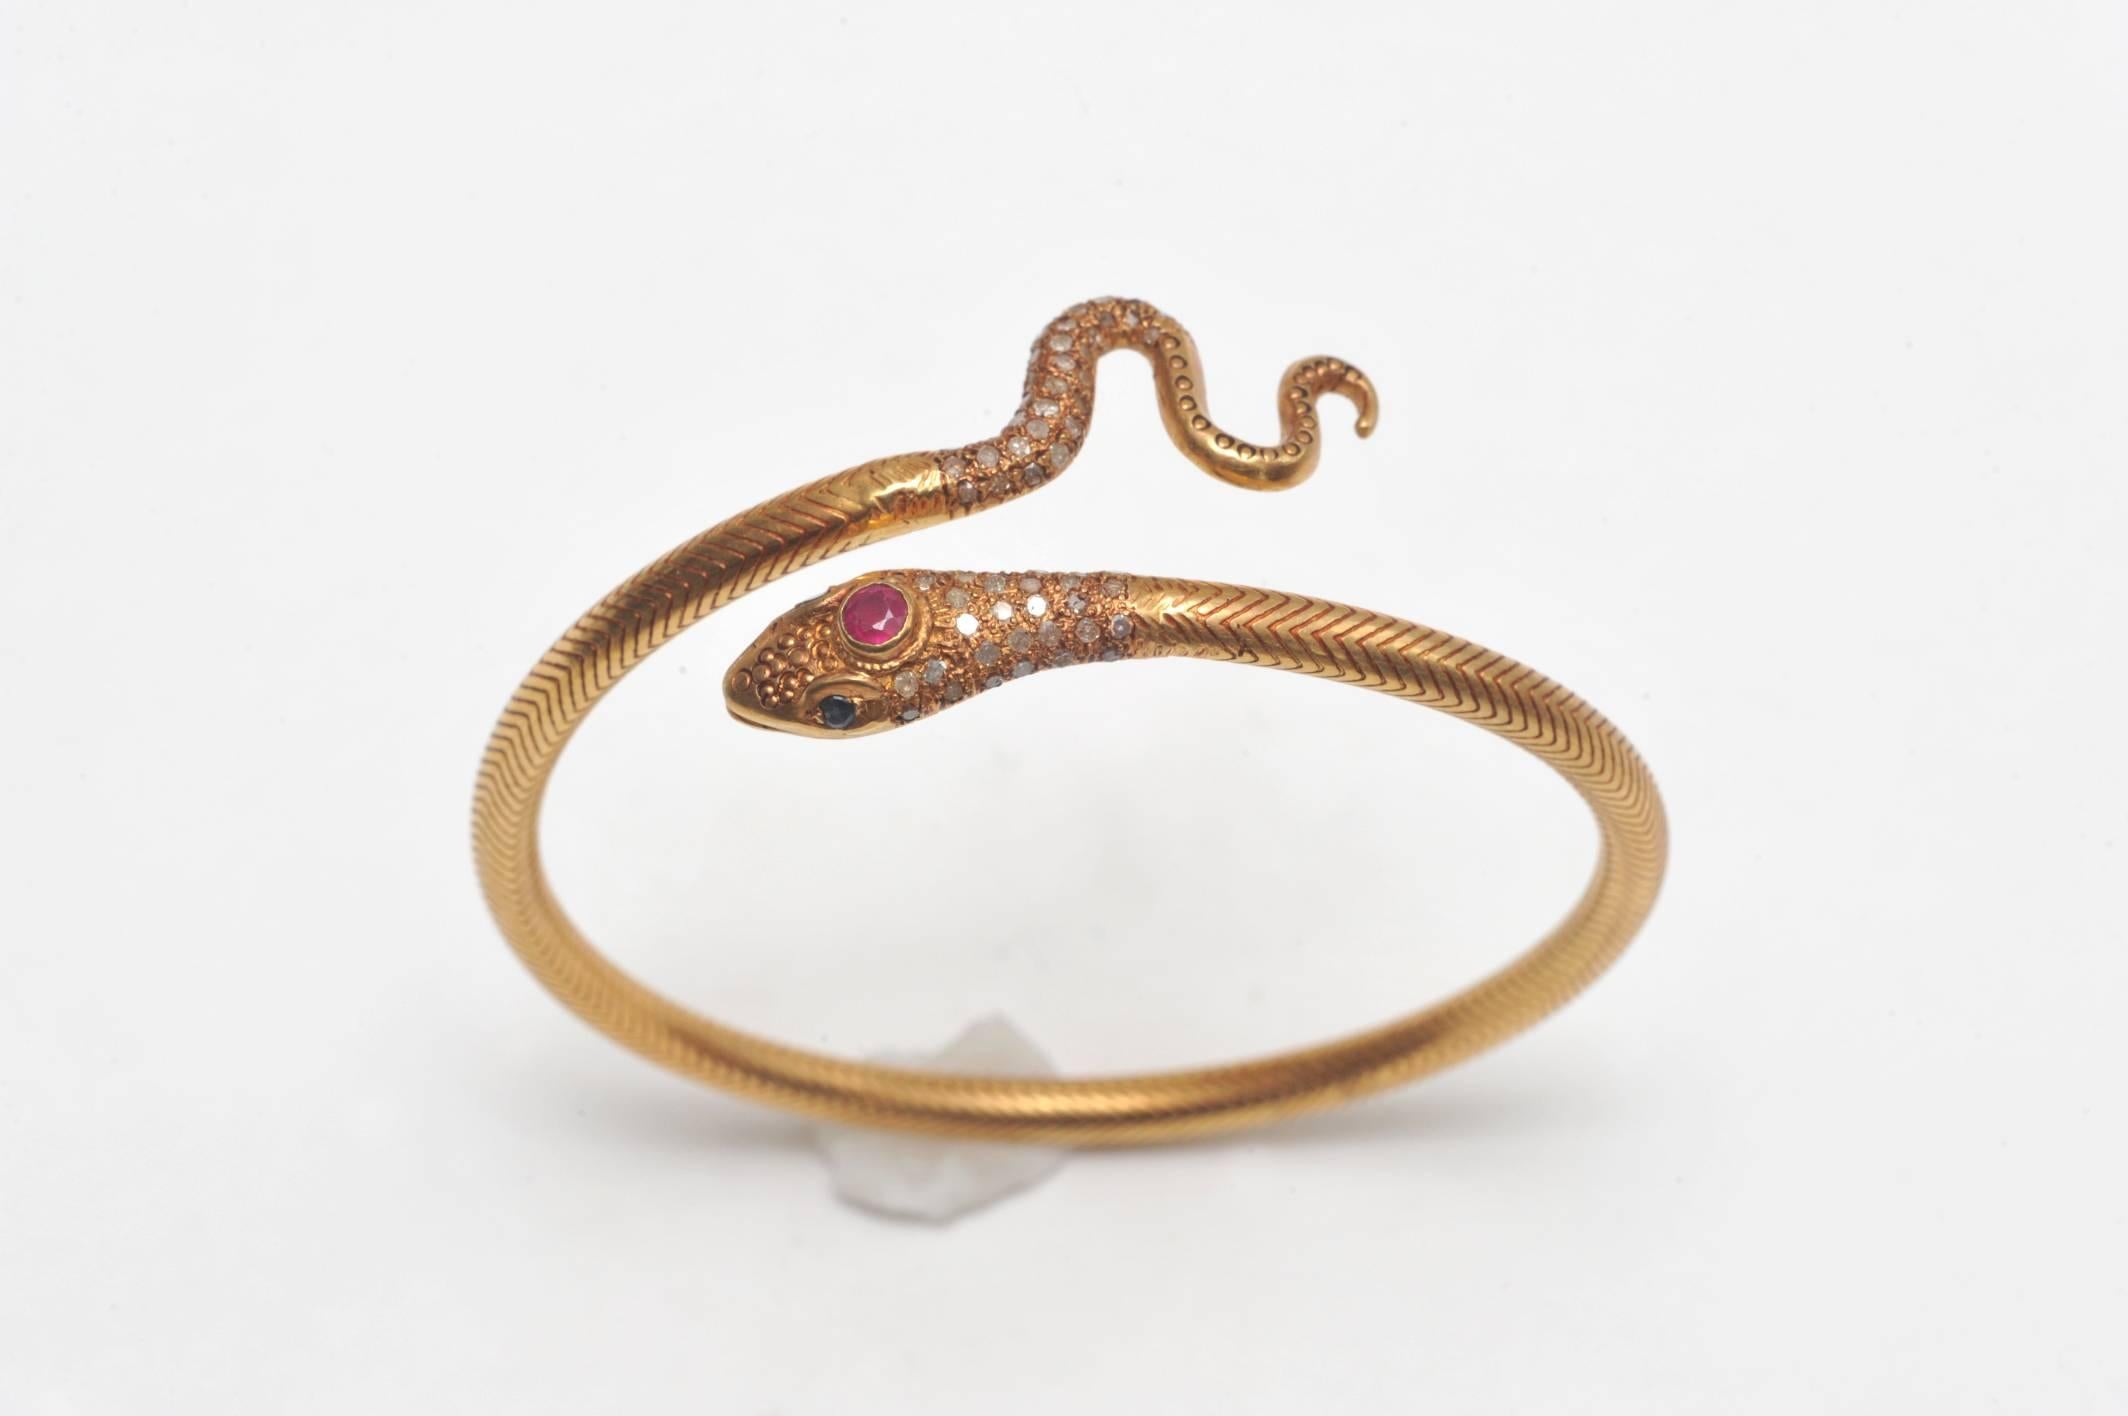 An exquisite snake bracelet of densely woven 18K gold in a herringbone pattern with pave`-set diamonds at the top of the head and the tail.  Has a faceted ruby third eye and faceted blue sapphire eyes.  Easy to get on as it has a bit of flex for a